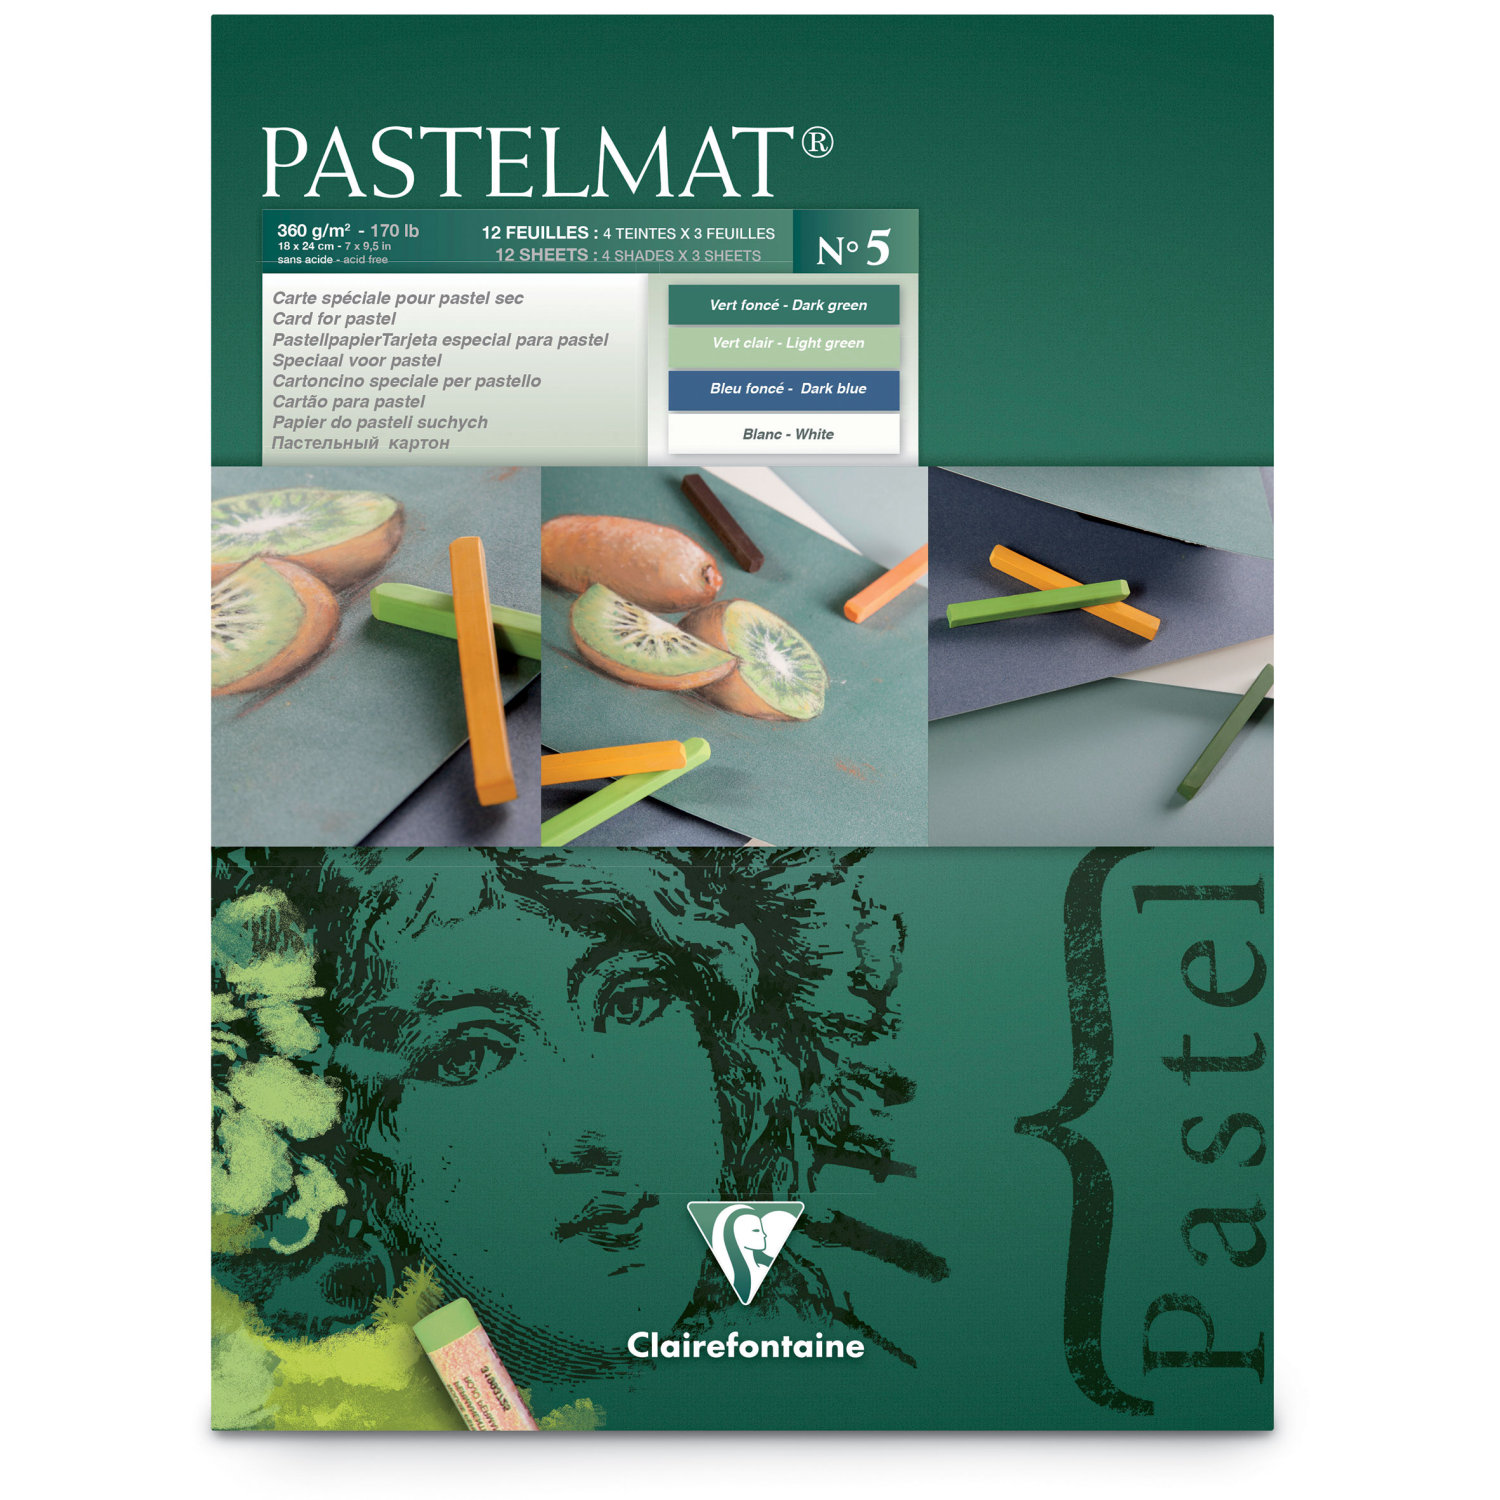 Clairefontaine Pastelmat Green Shades No.5 - 12 sheets 24 x 30cm